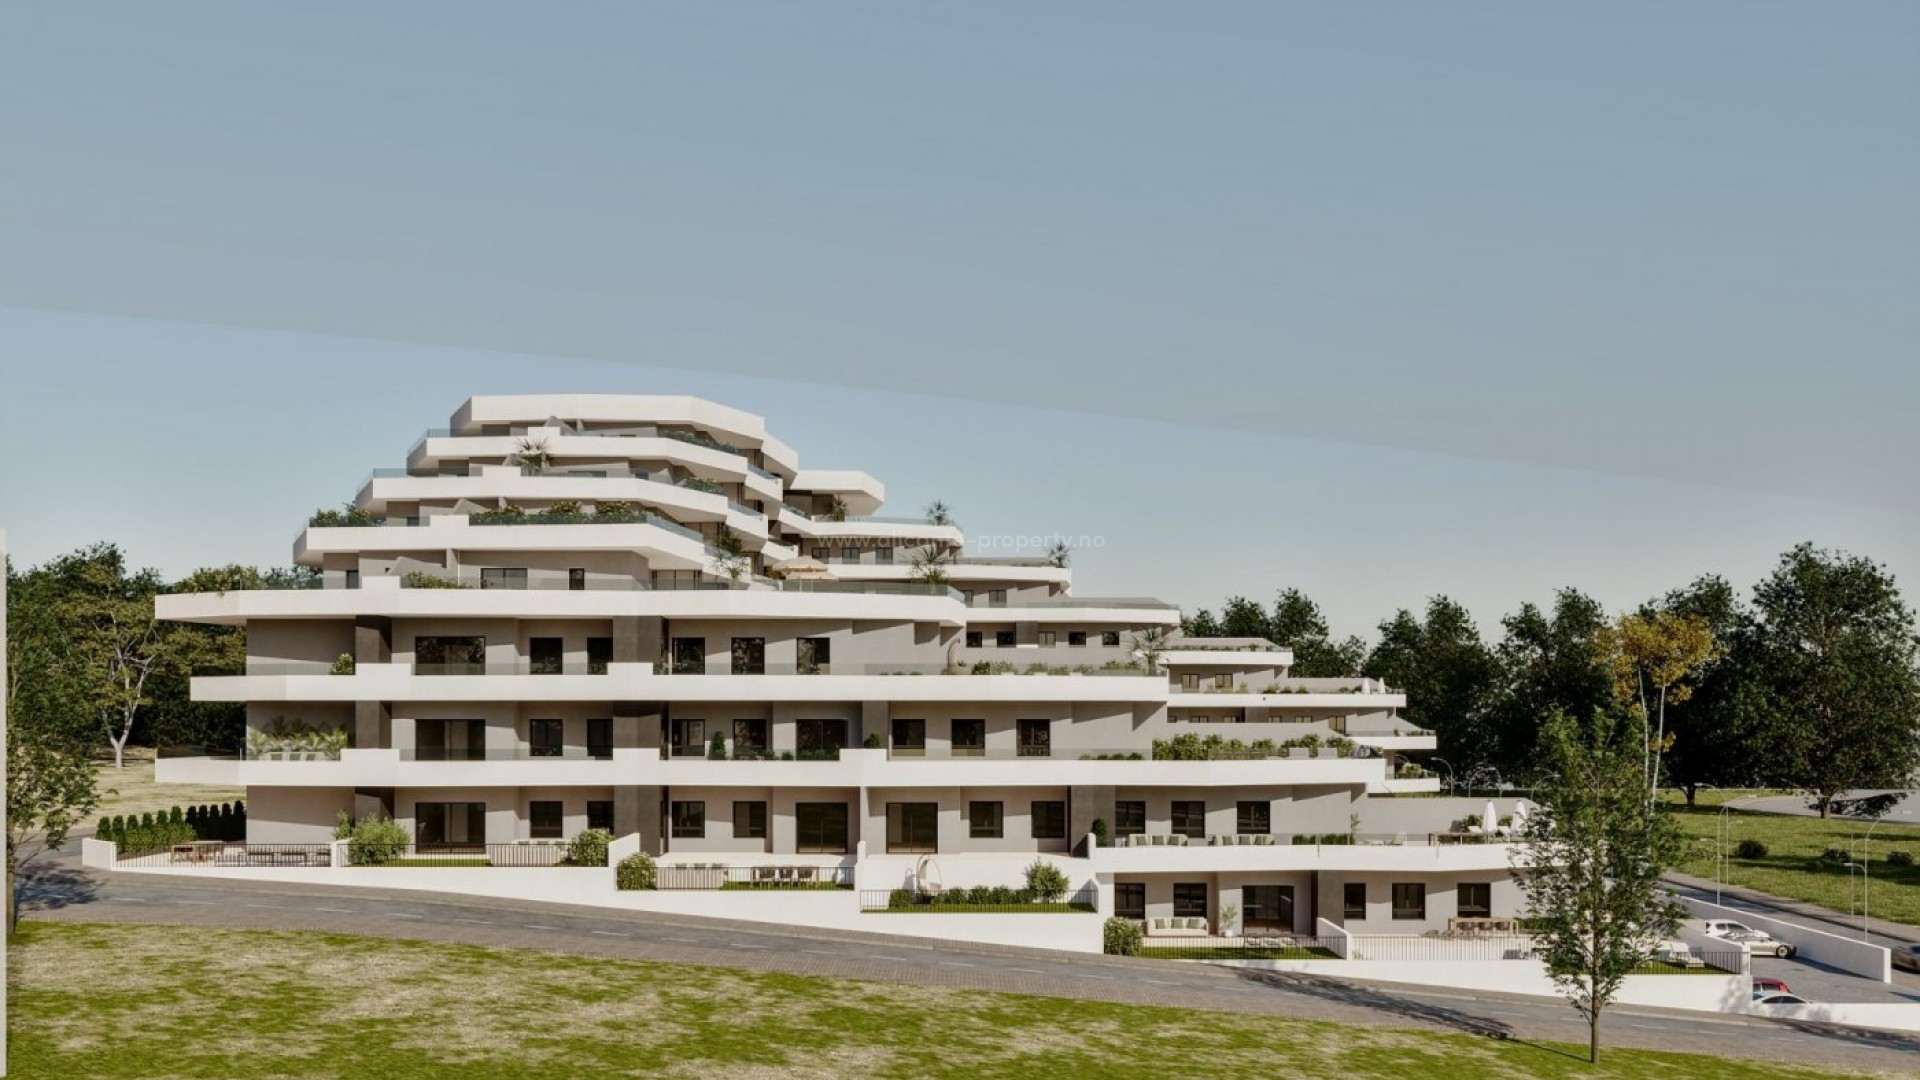 165 apartments in residential complex in San Miguel de Salinas, 2/3 bedrooms, communal swimming pool for adults and children, green areas, playground, near golf courses